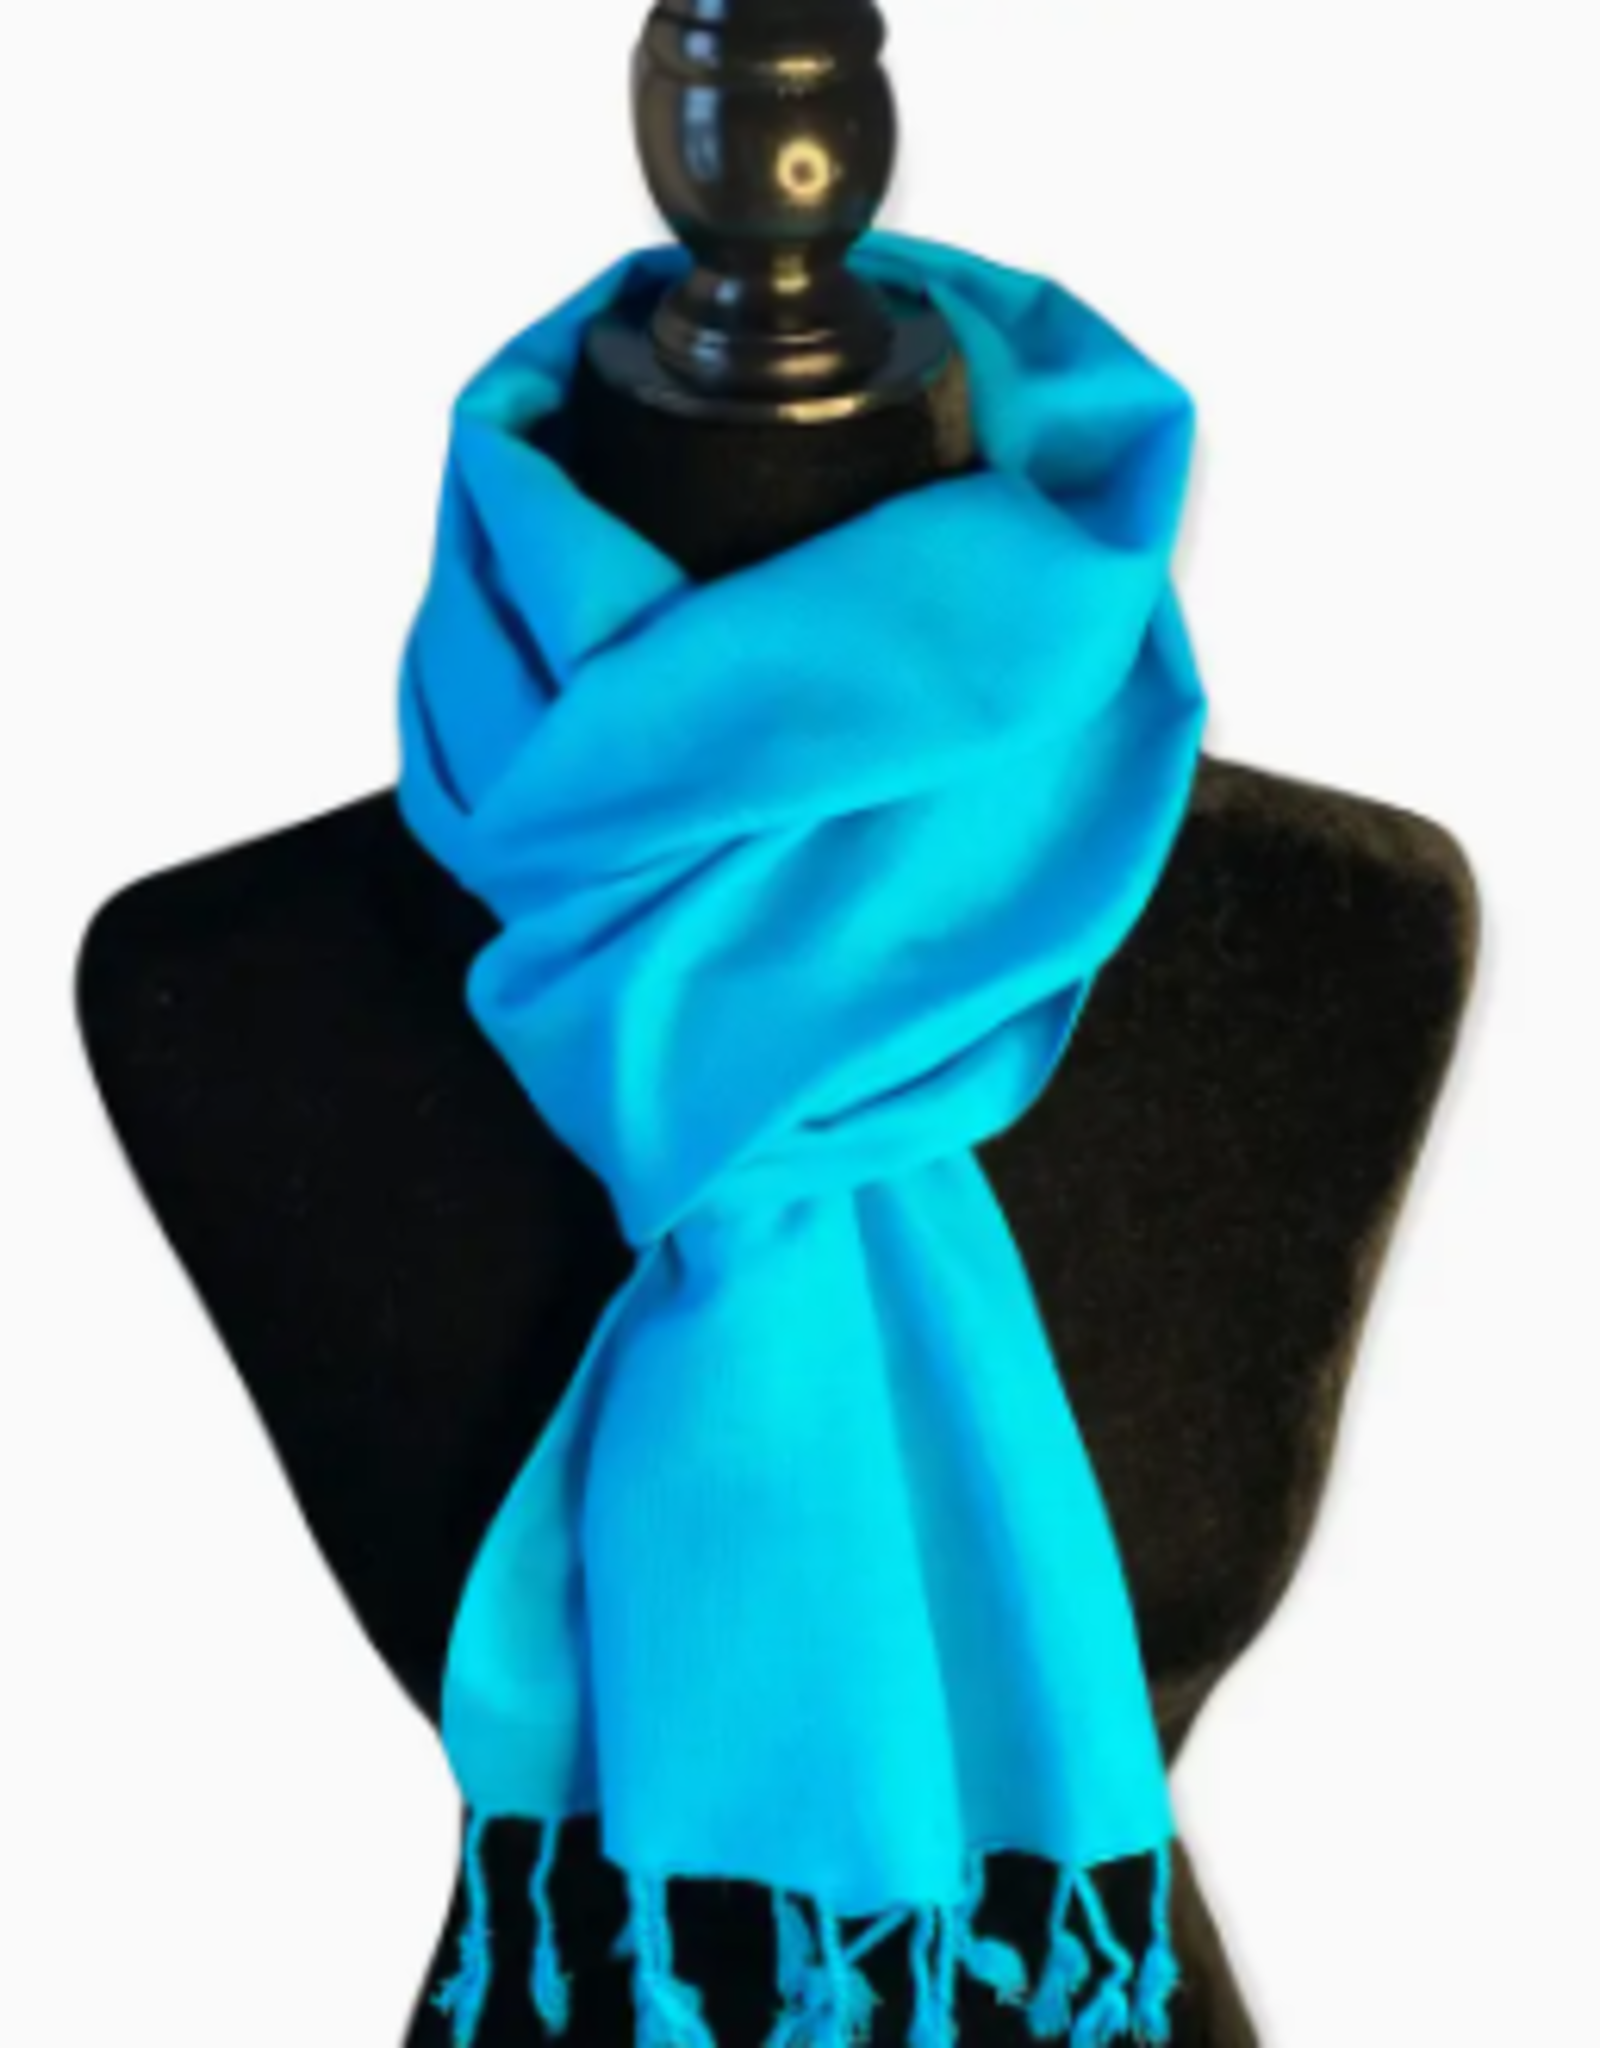 Dandarah Small Solid Handwoven Scarf - Turquoise